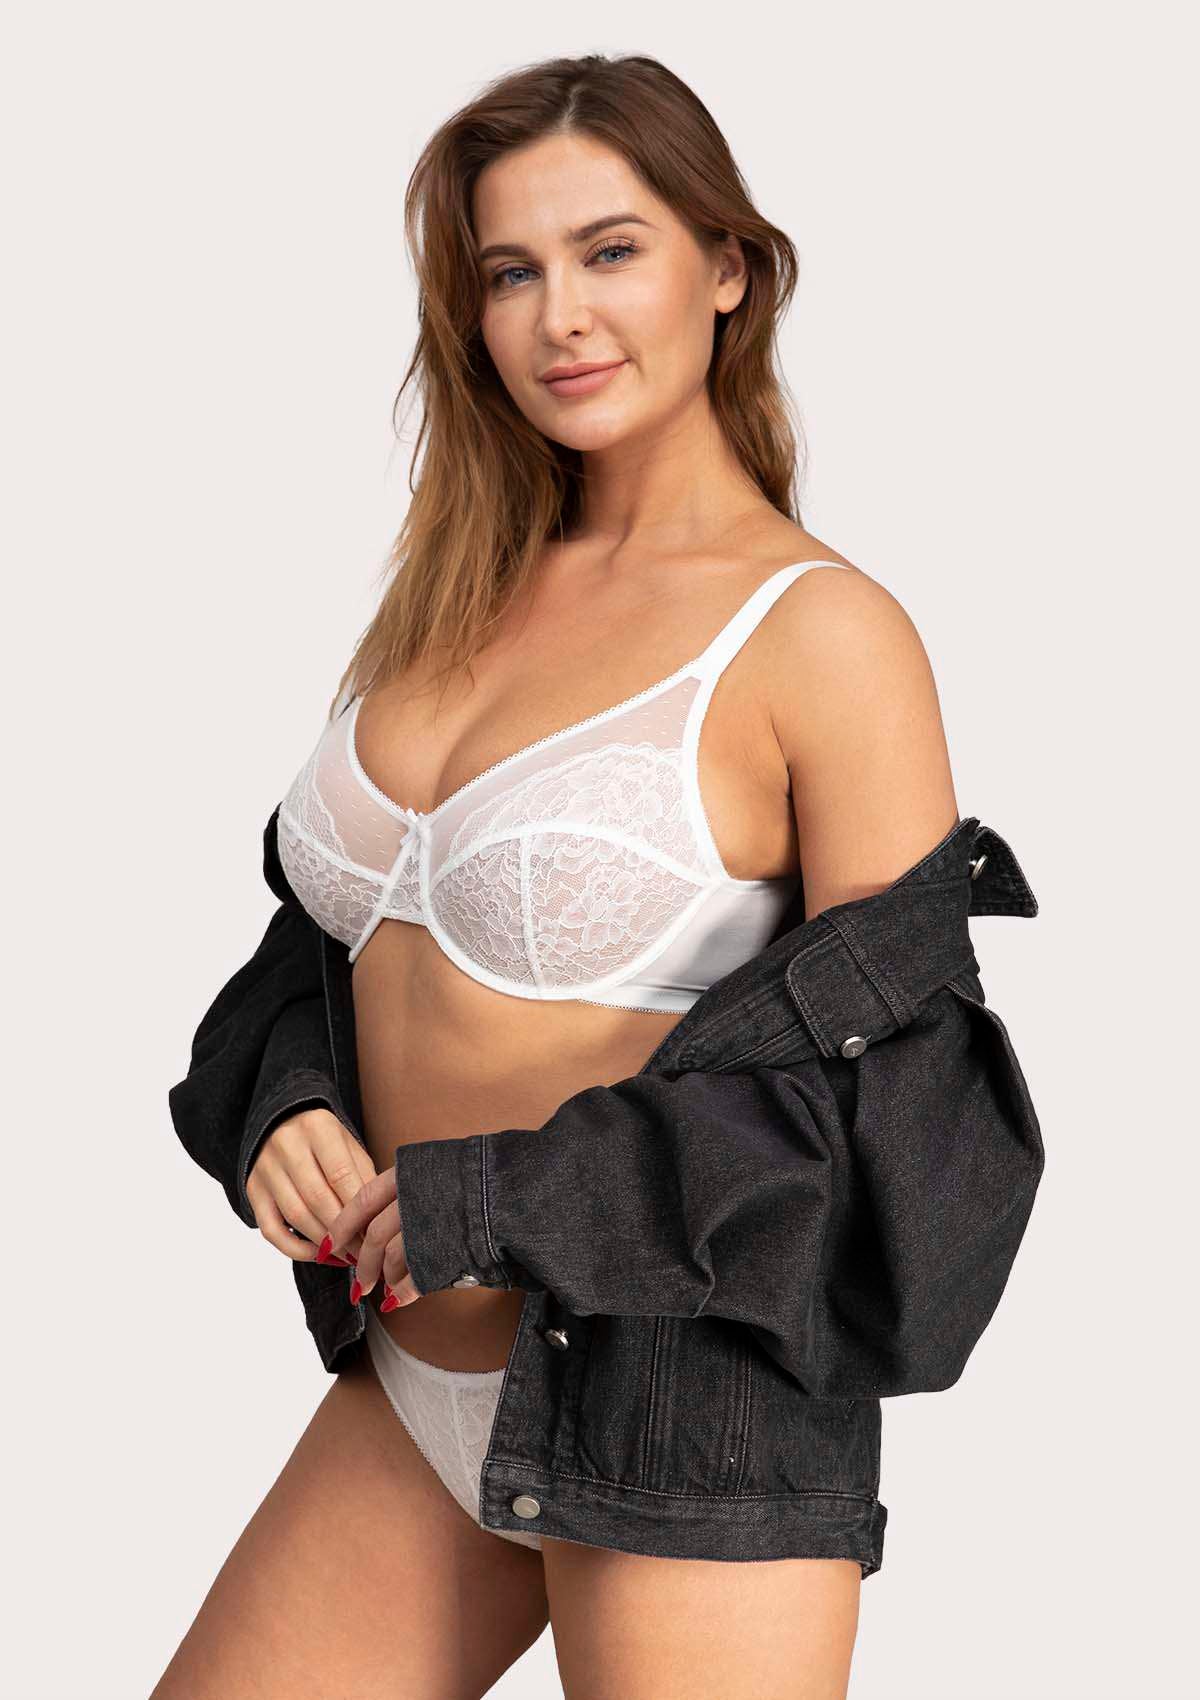 HSIA Enchante Lace Bra And Panties Set: Bra For Side And Back Fat - White / 44 / D